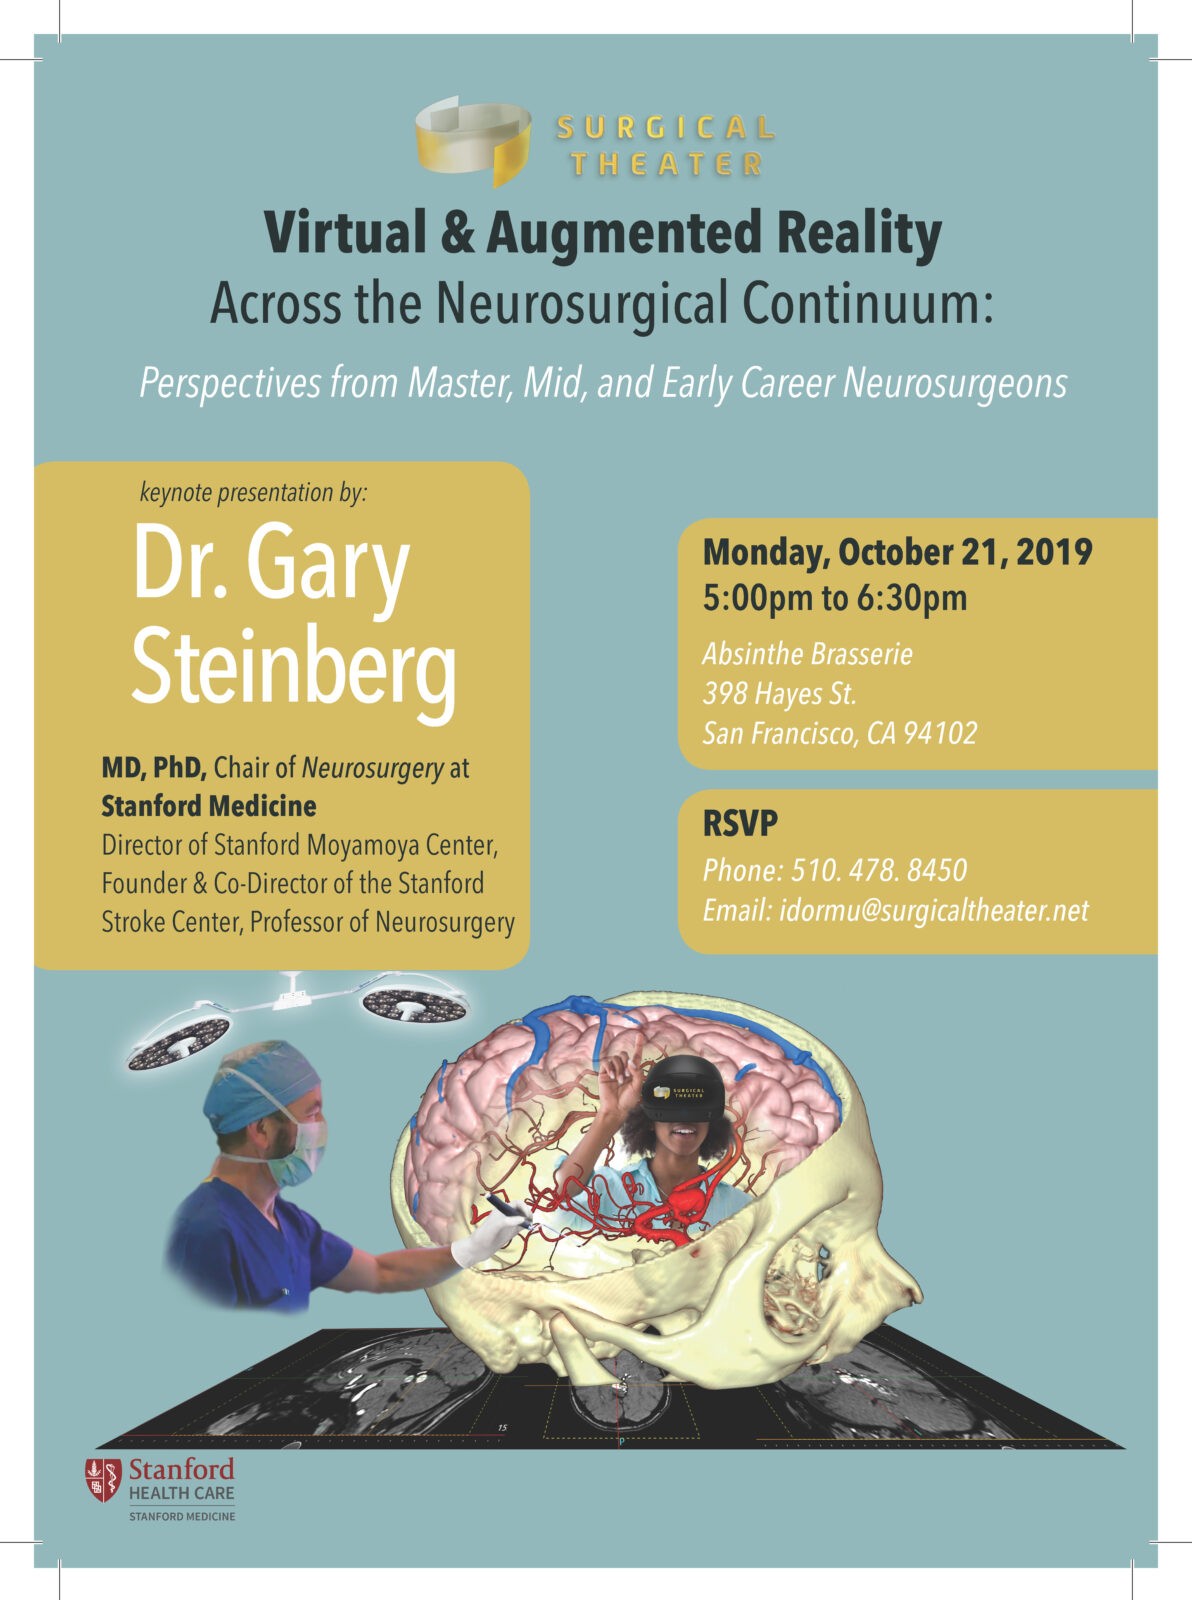 Virtual & Augmented Reality Across the Neurosurgical Continuum